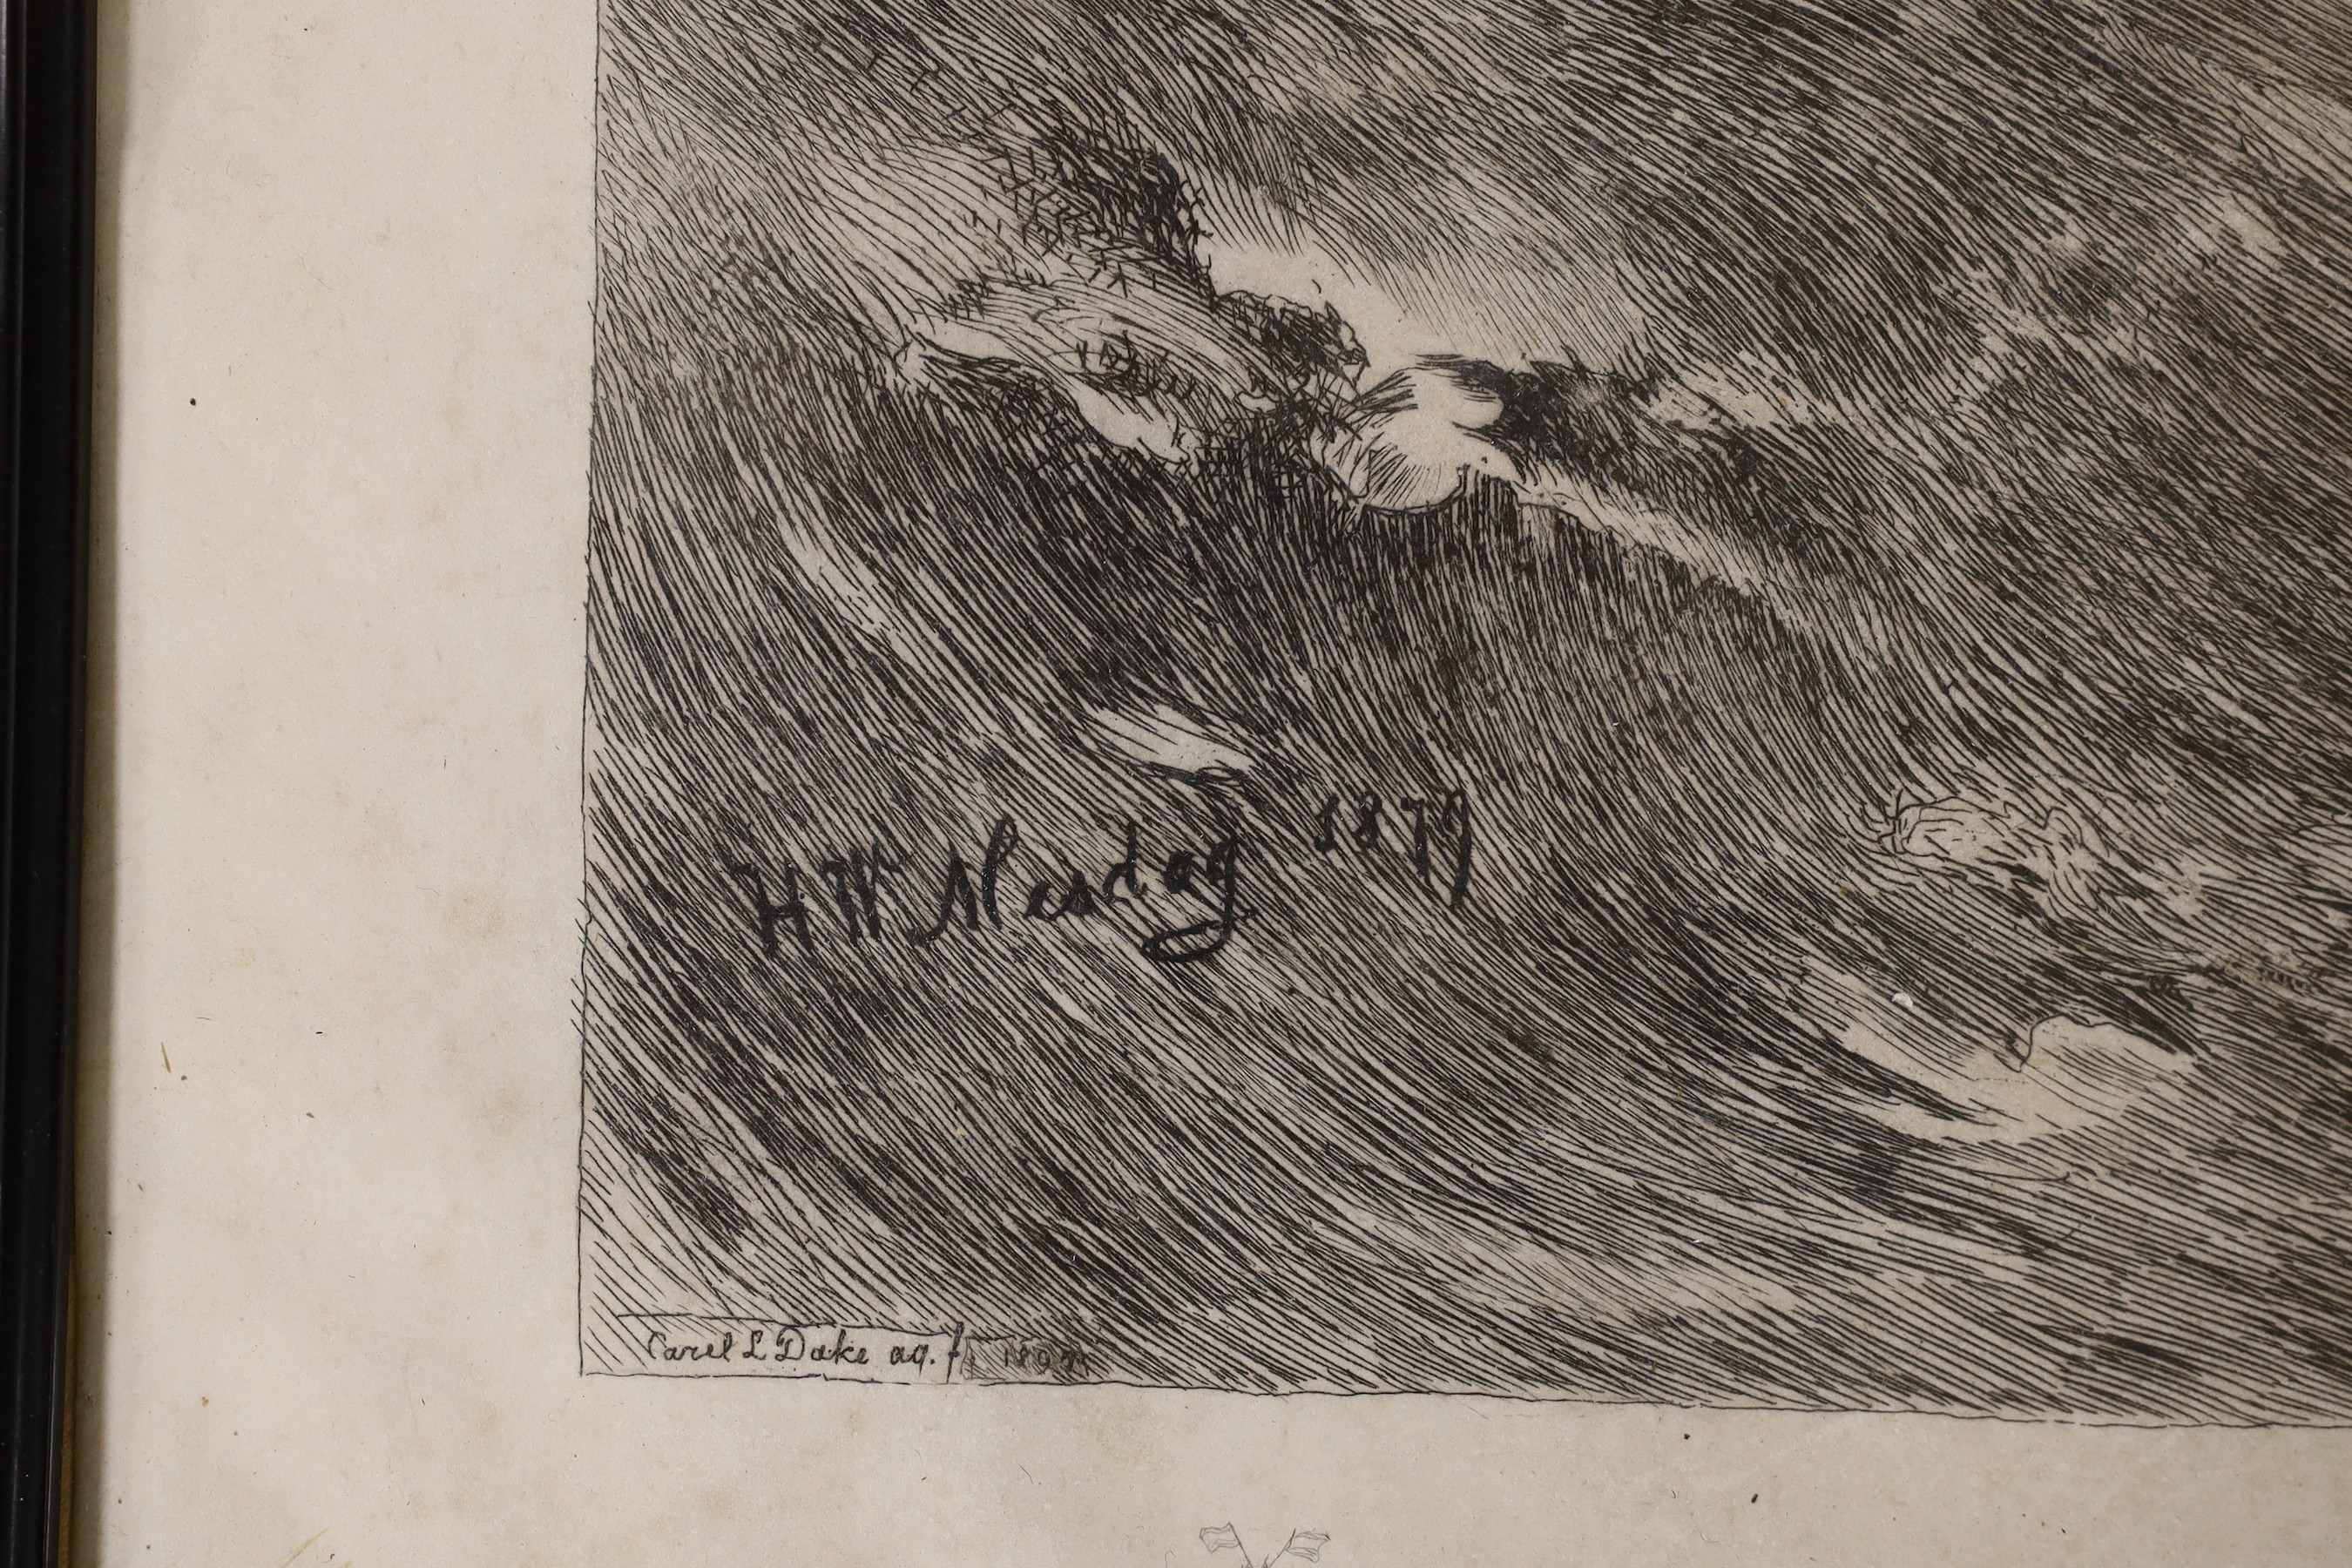 After, Hendrik Willem Mesdag, engraving, Scheveningen boats in the surf, signed Carel L. outside the plate, published by Roeloffzen & Hübner, Amsterdam, 68 x 53cm